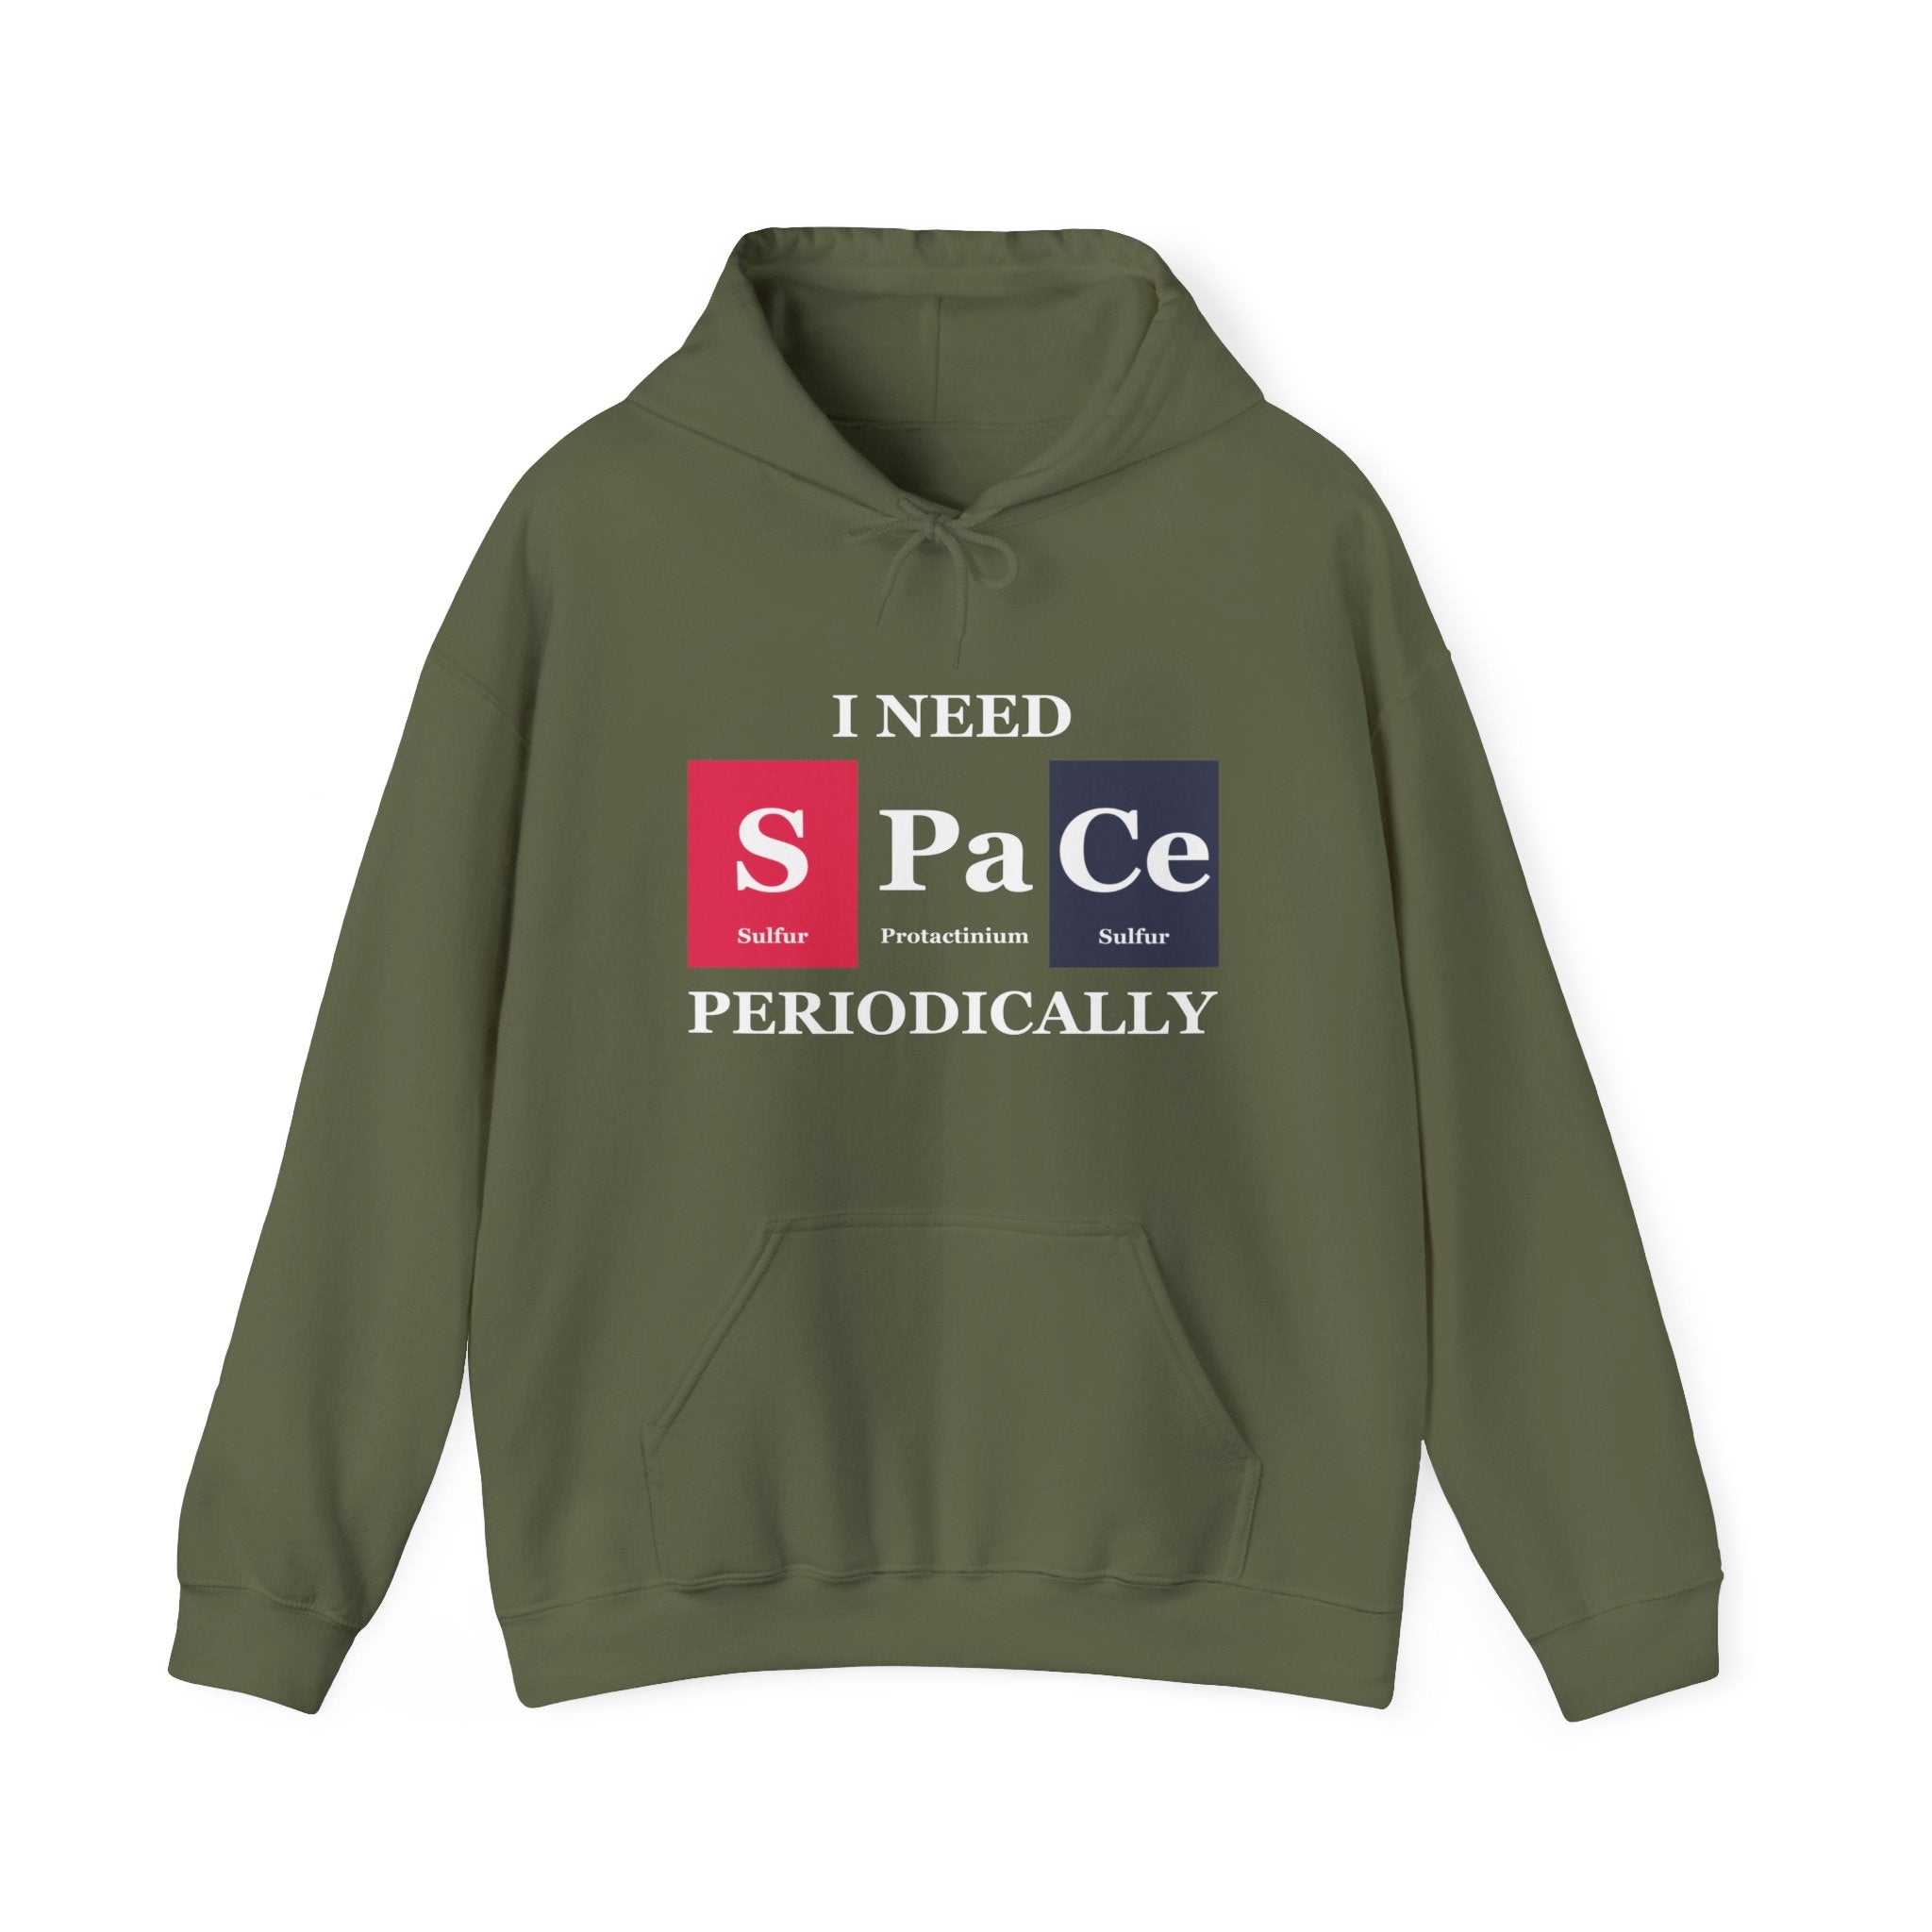 Vibrant green S-Pa-Ce - Hooded Sweatshirt featuring the witty text "I NEED S Pa Ce PERIODICALLY" cleverly using Sulfur, Protactinium, and Cerium from the periodic table. Perfect for showcasing your love for science with a dash of humor!